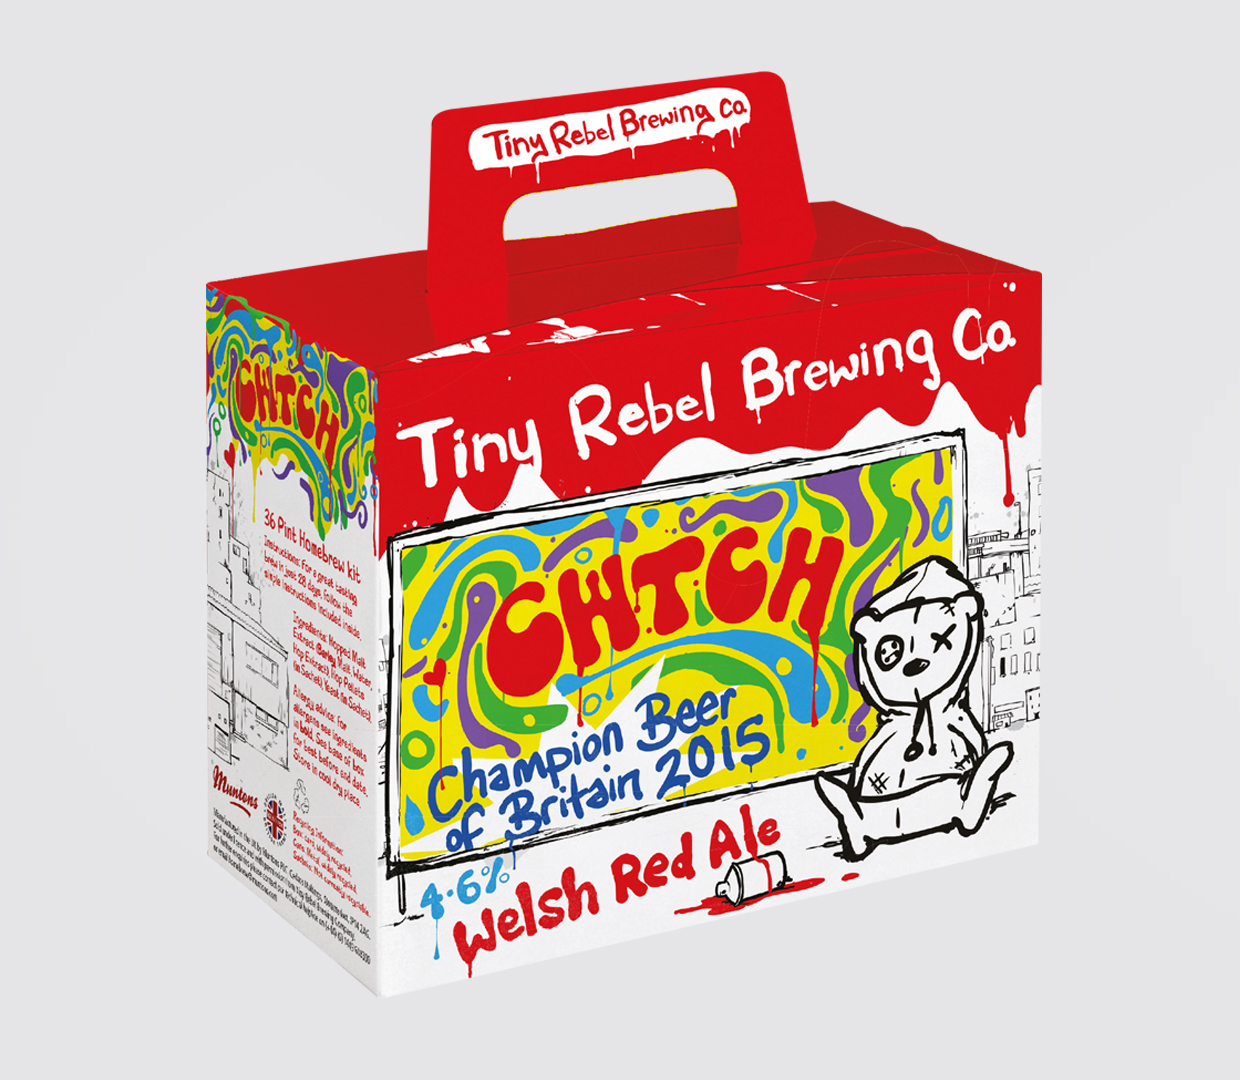 Home Brewing Ingredients CWTCH Welsh Red Ale Tiny Rebel Brewing Company 3kg 